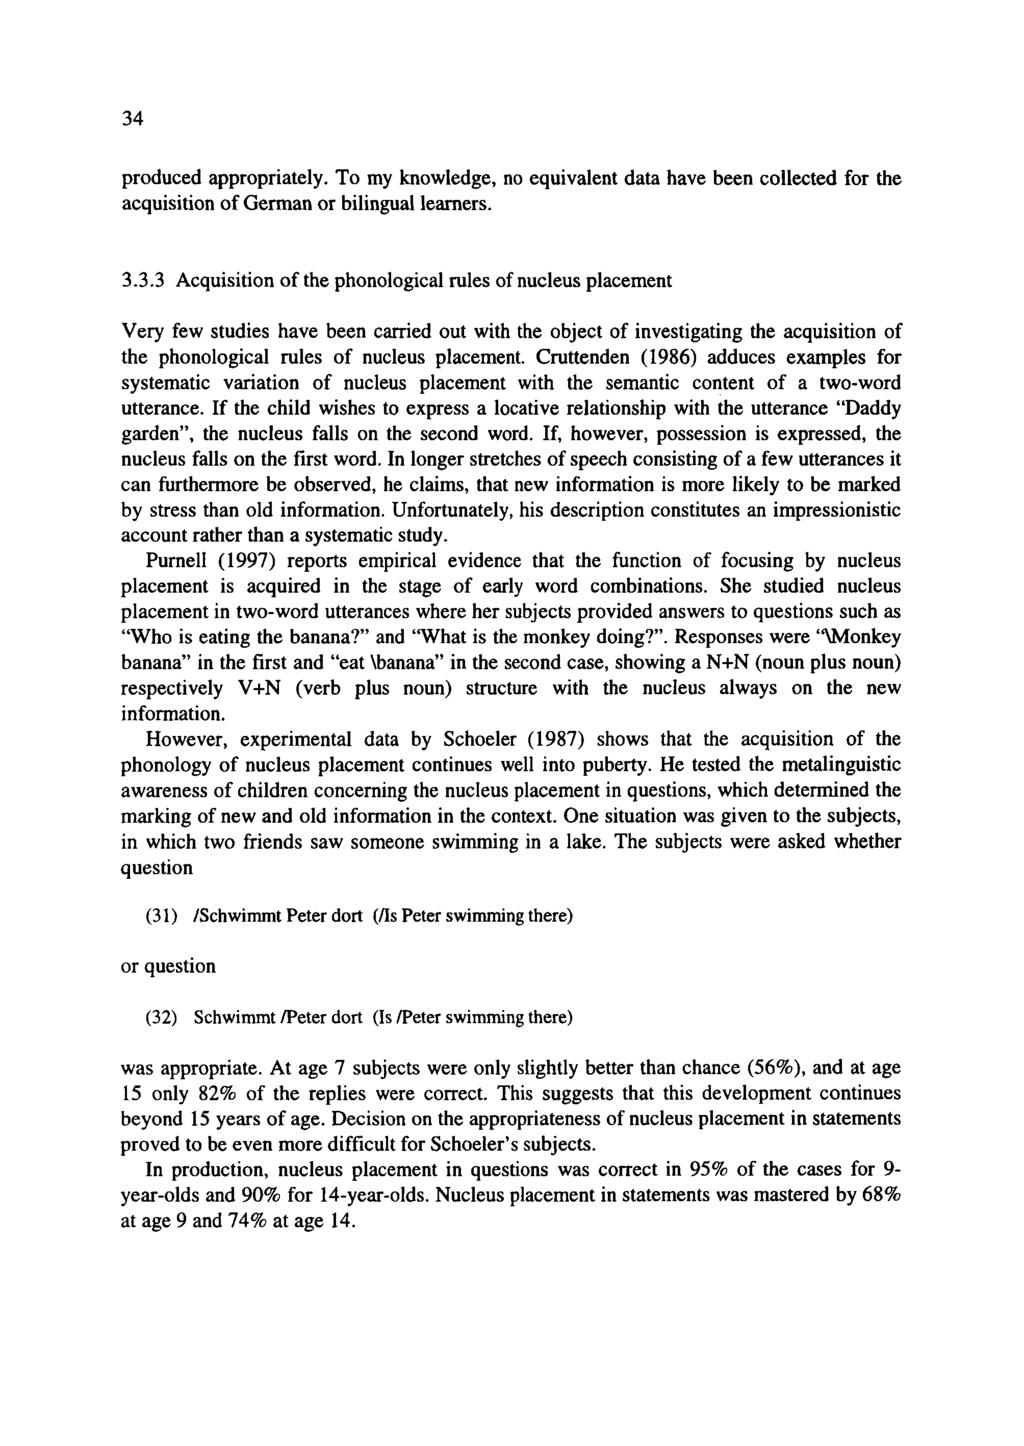 34 produced appropriately. To my knowledge, no equivalent data have been collected for the acquisition of German or bilingual learners. 3.3.3 Acquisition of the phonological rules of nucleus placement Very few studies have been carried out with the object of investigating the acquisition of the phonological rules of nucleus placement.